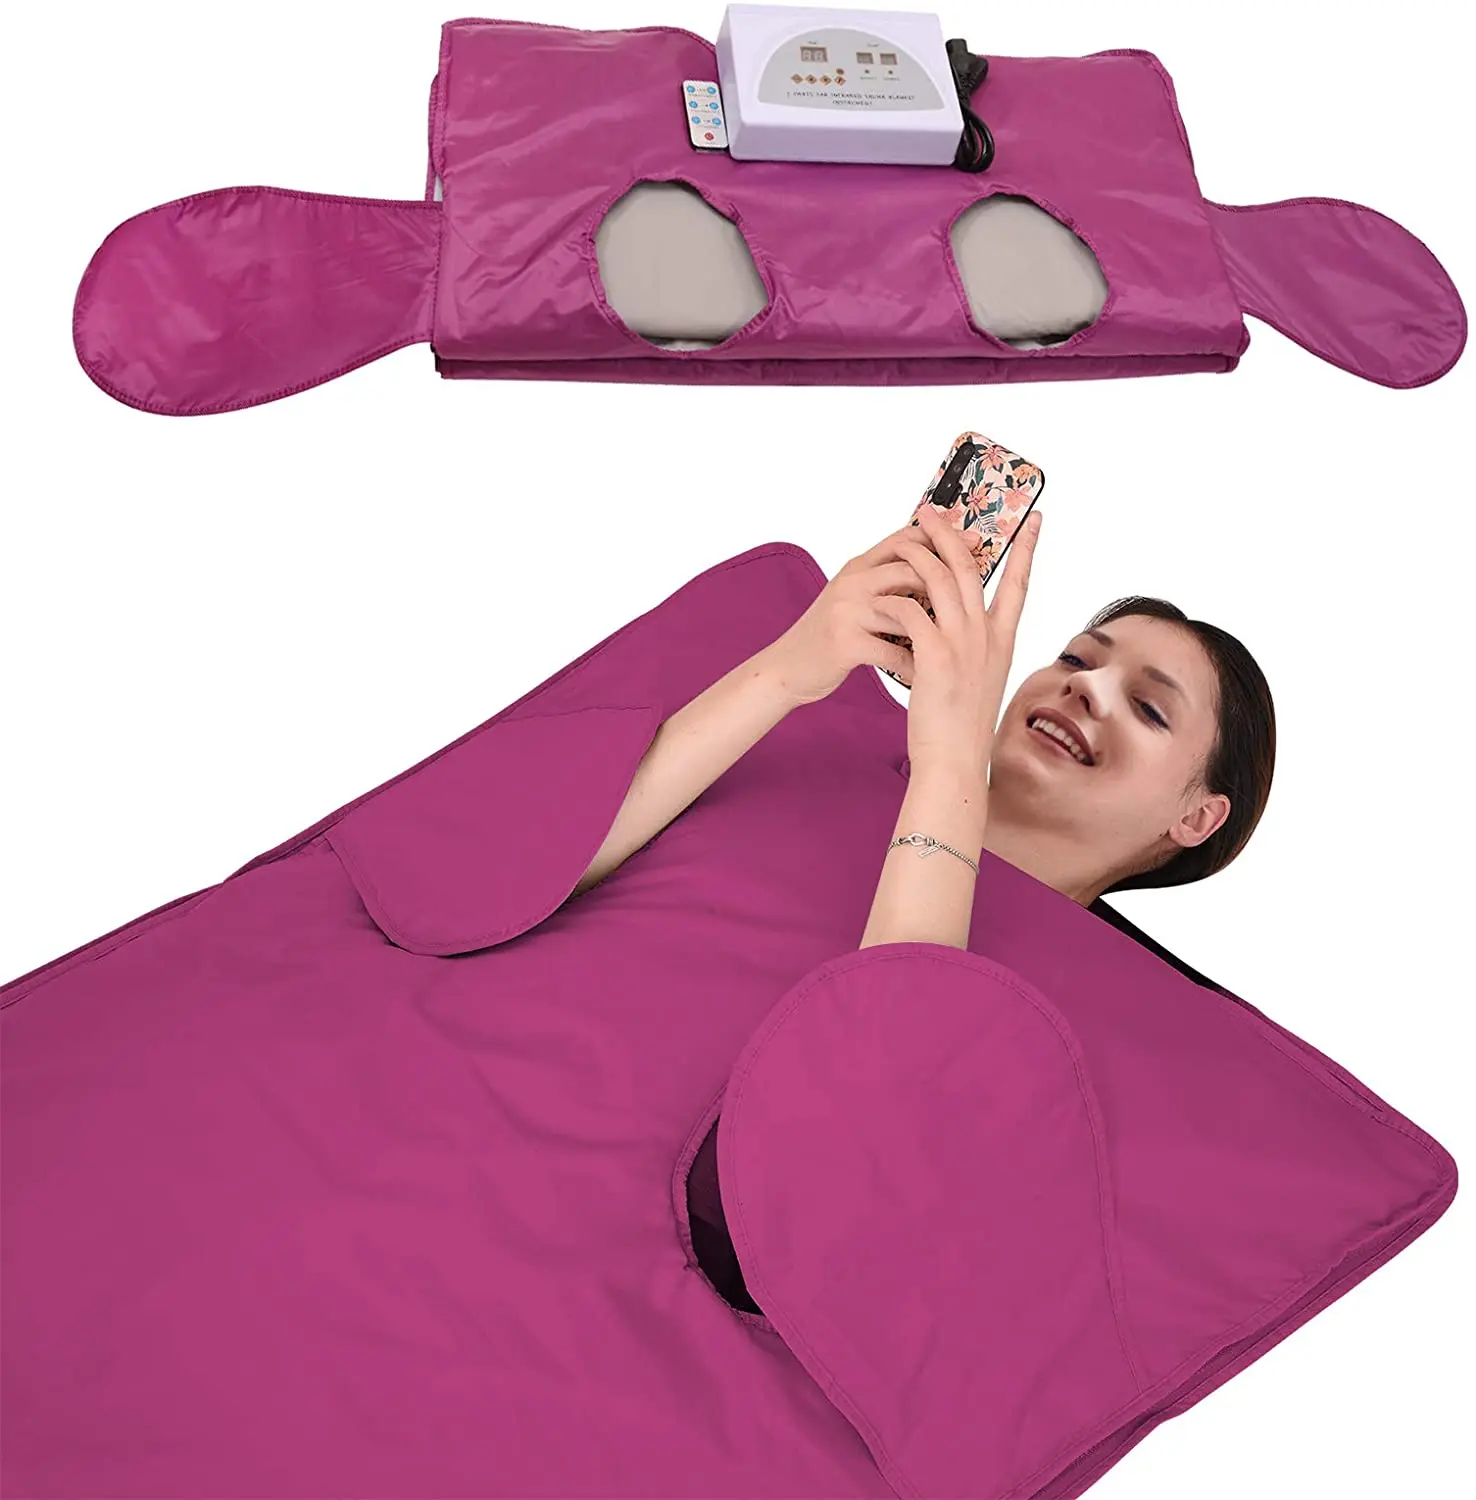 

Far Infrared Sauna Blanket 2 Zone Weight Loss Detox Therapy FIR Sauna Blanket for Body Shape Slimming Fitness for Women Man